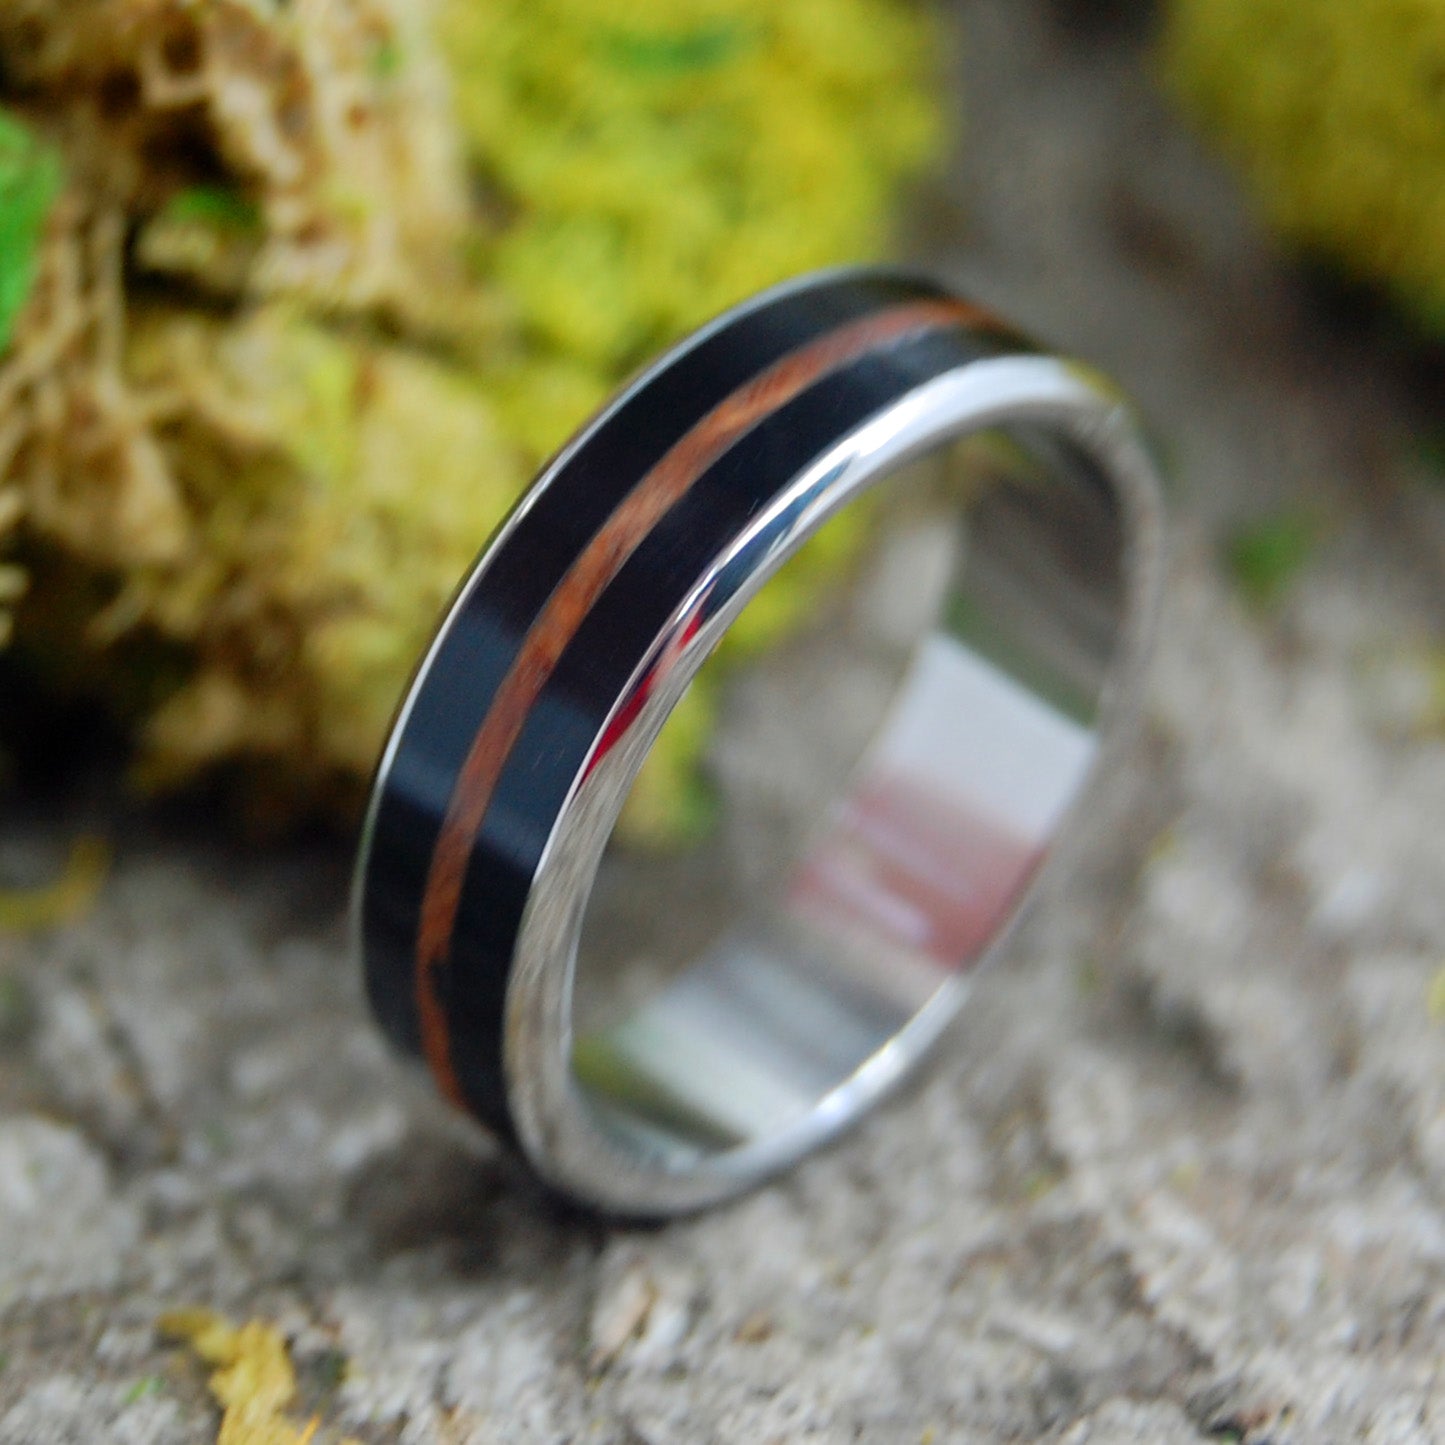 ONYX REDWOOD | Handcrafted Redwood & Onyx Stone Titanium Wedding Rings - Minter and Richter Designs